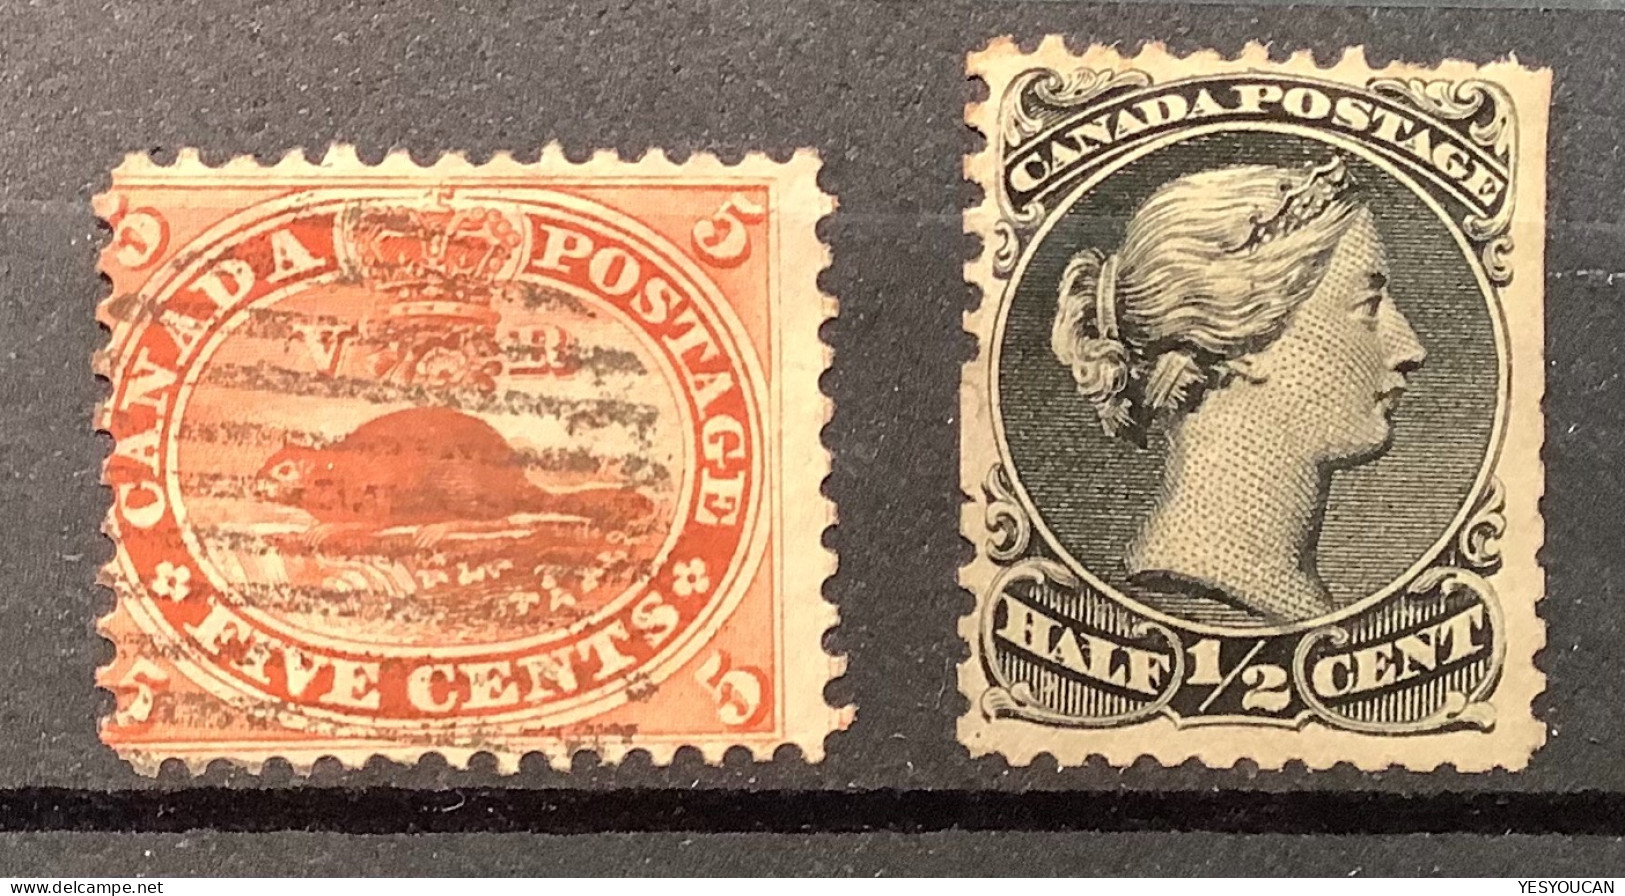 Canada 1859-1898 Lot Of 22 Queen Victoria & Beaver Stamps (Scott 1000$ +) INCLUDING BETTER ONES Used And Unused - Used Stamps